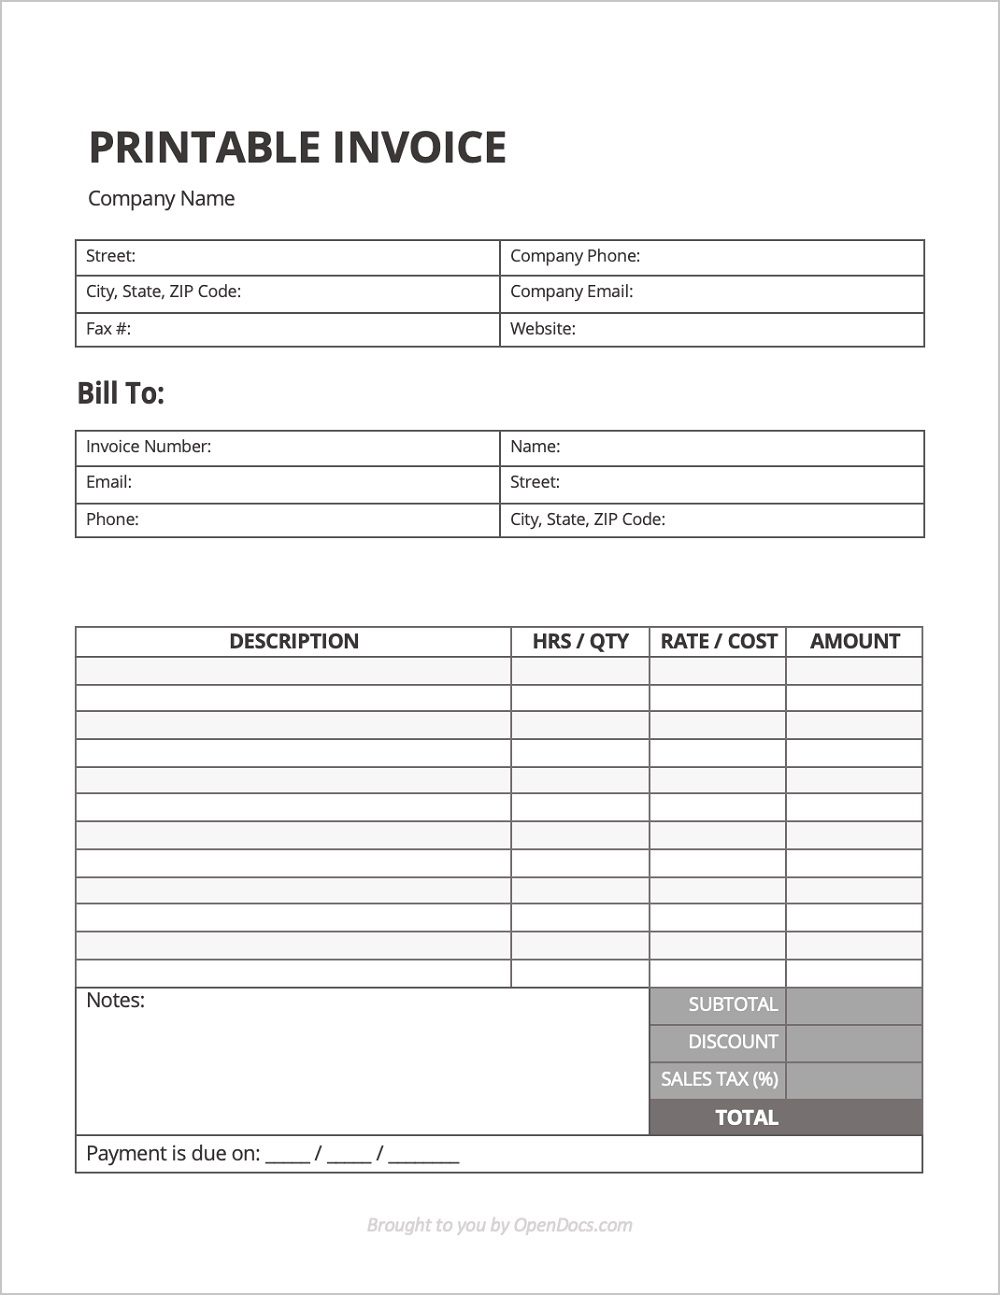 Printable Invoice Template Images